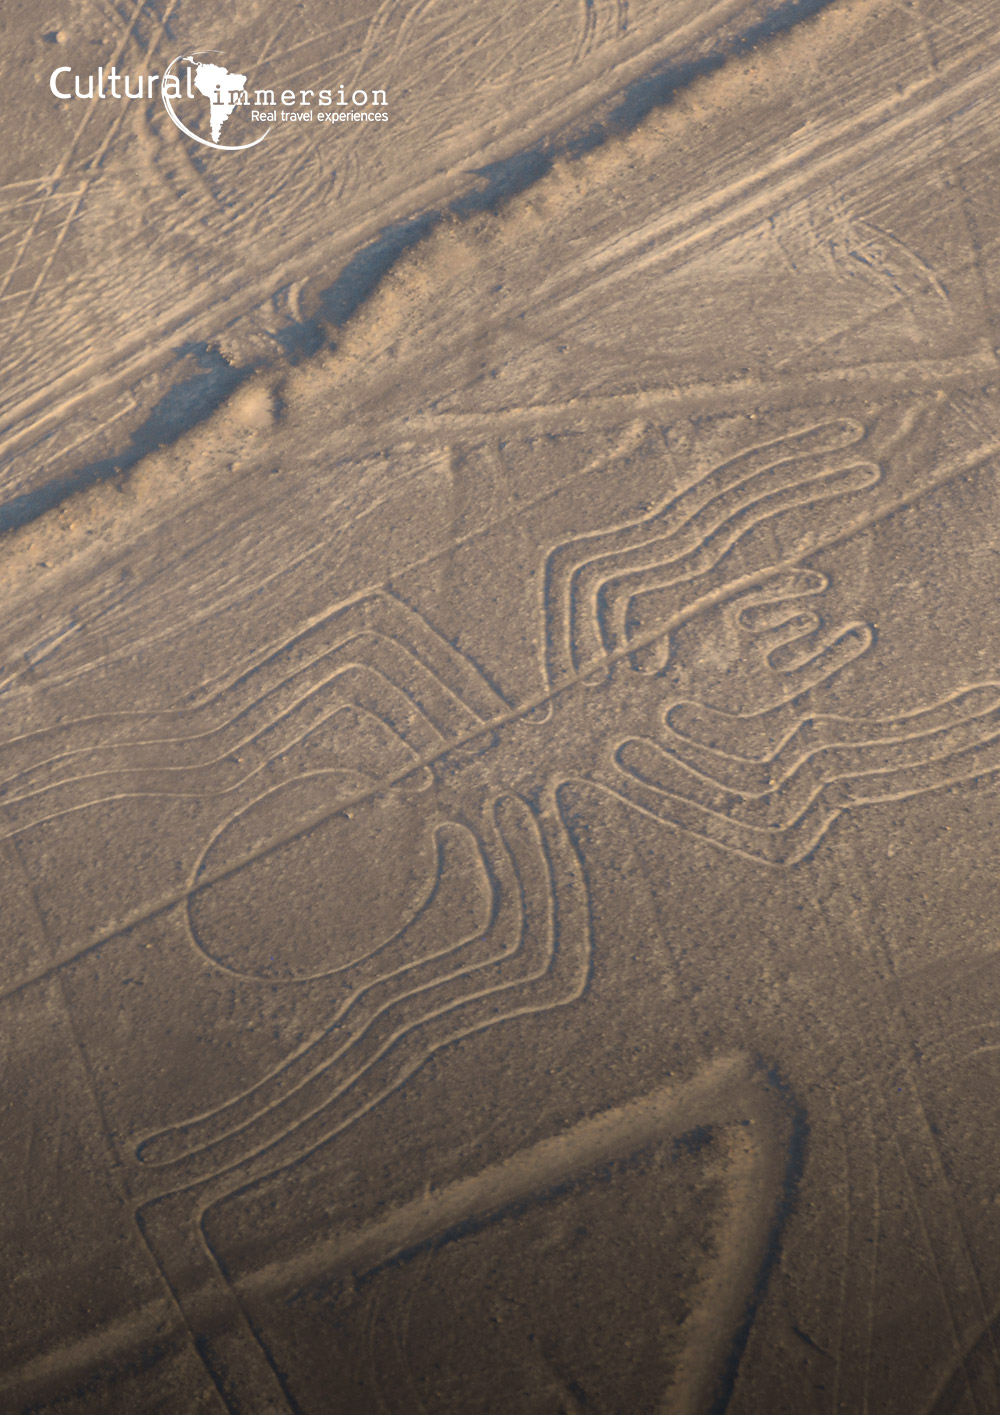 From The Nazca Lines To Machu Picchu